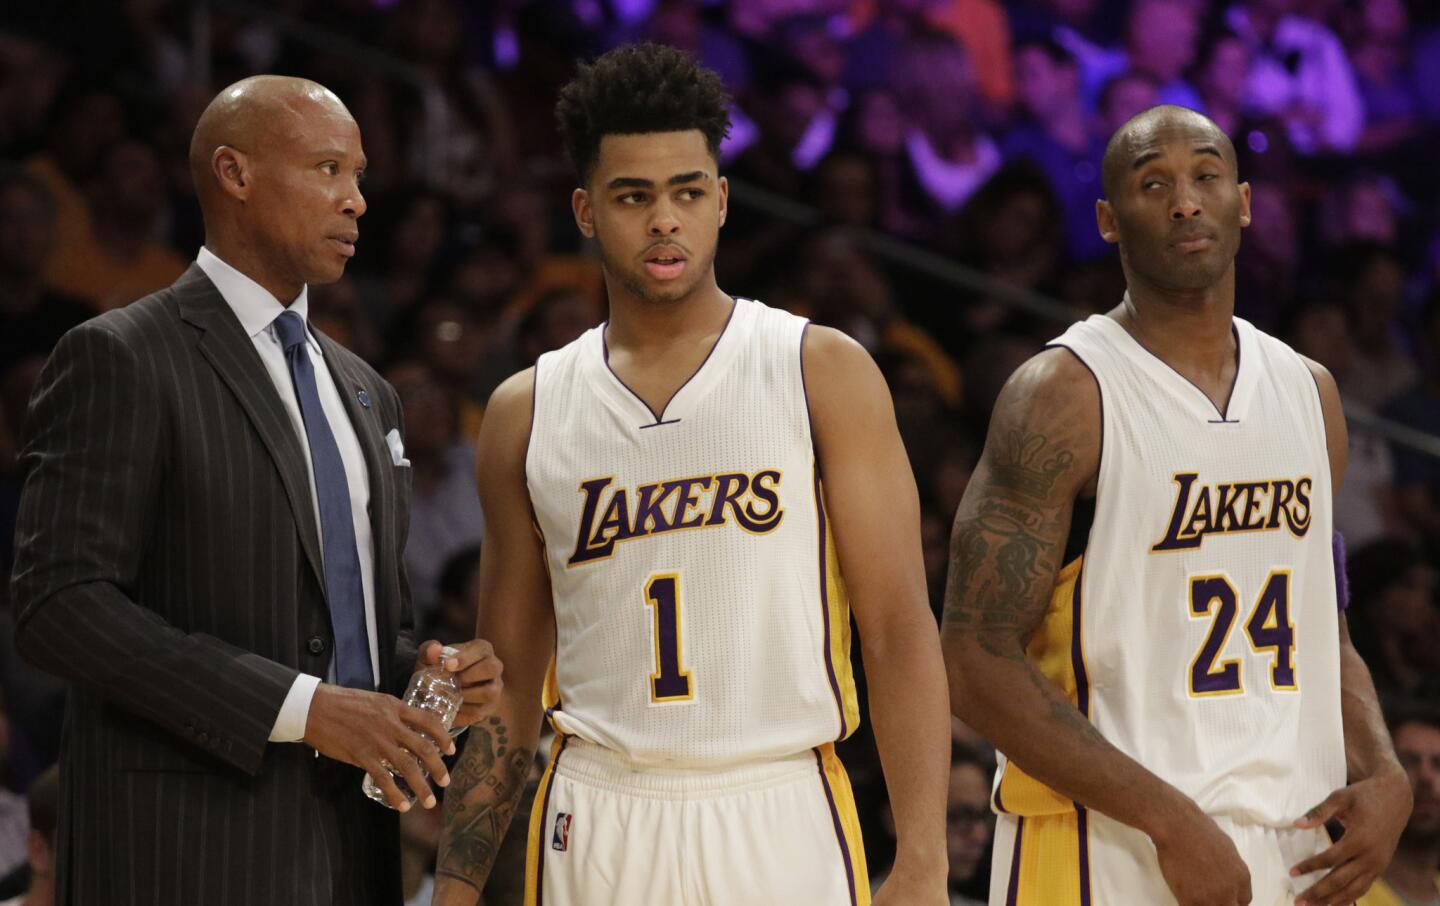 Lakers Coach Byron Scott glad to get this show on the road